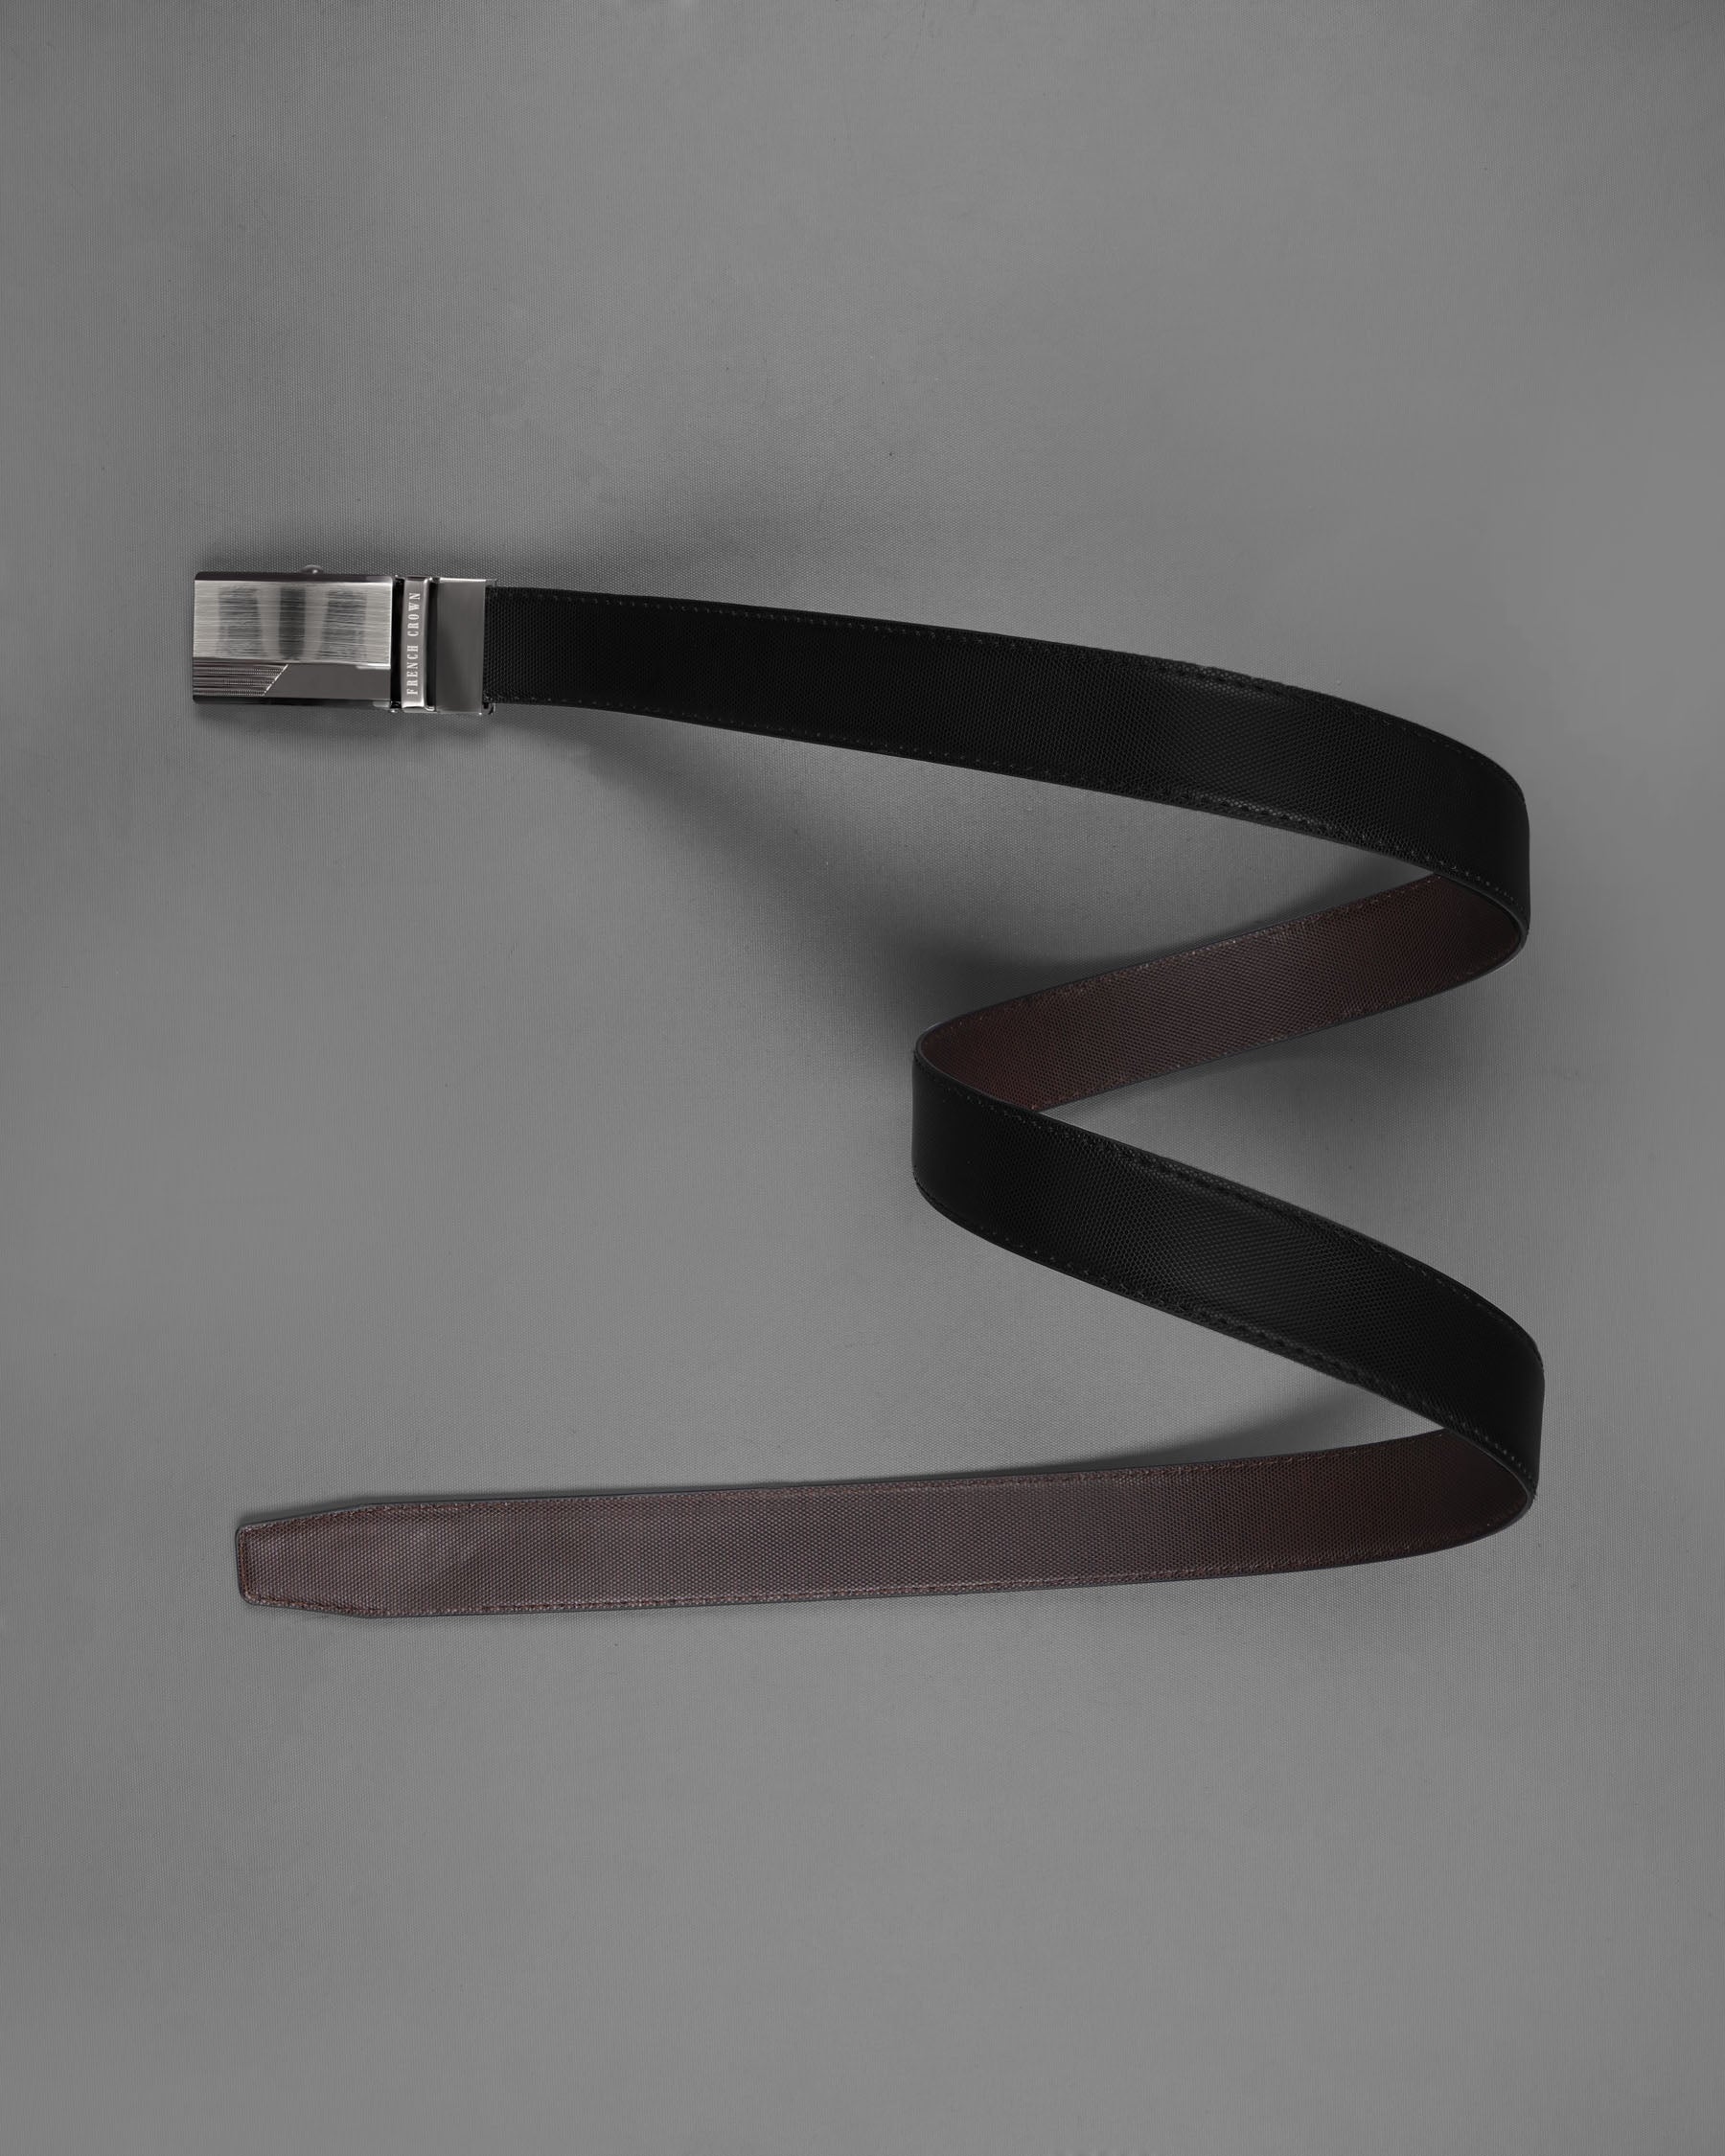 Silver Metallic with Black Shiny Box Buckle with Jade Black and Brown Leather Free Handcrafted Reversible Belt BT073-28, BT073-30, BT073-32, BT073-34, BT073-36, BT073-38